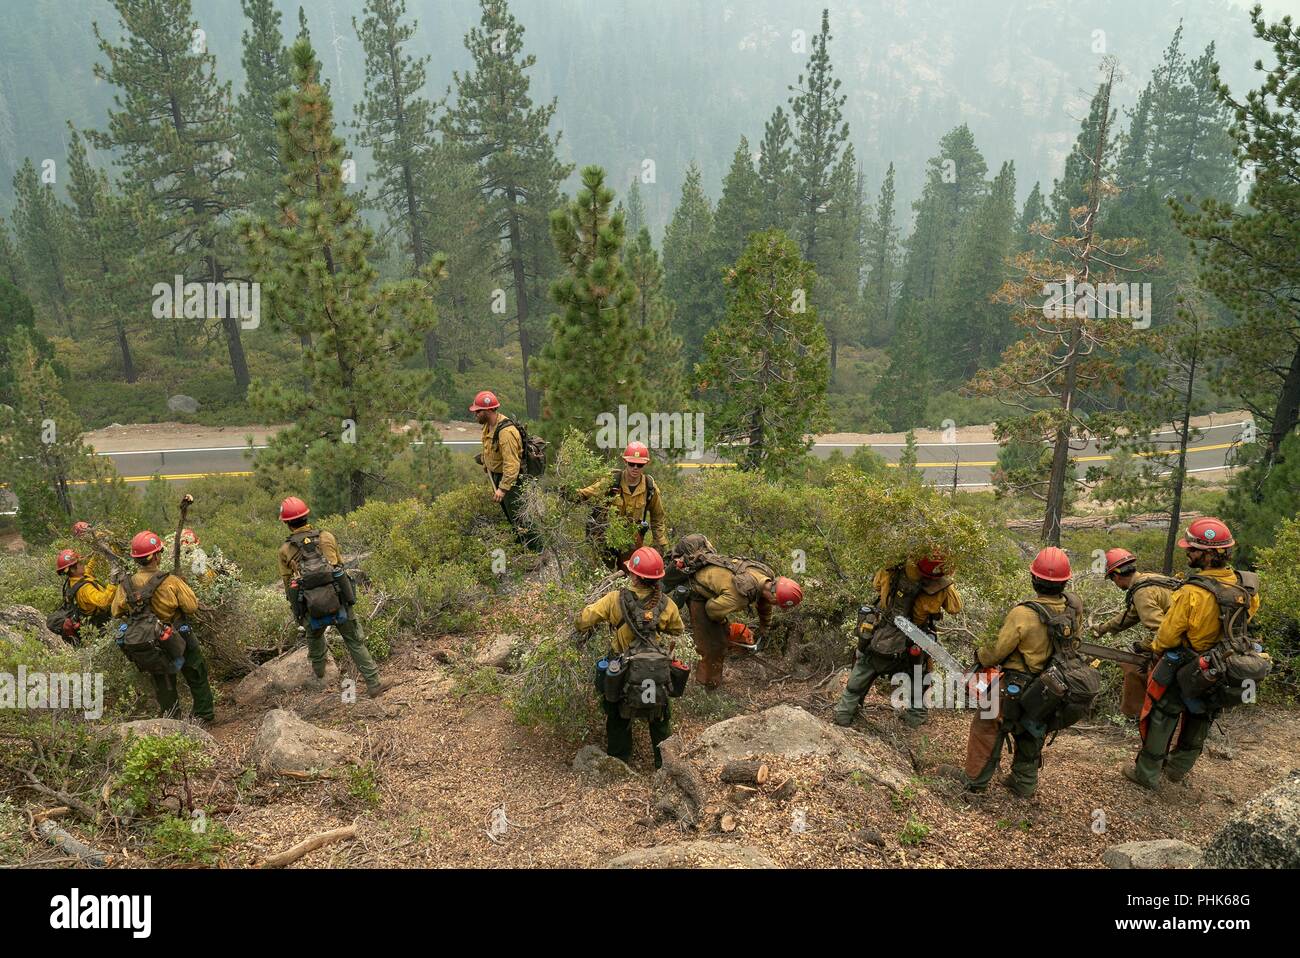 Stanislaus Hot Shot Crew firefighters clear out vegetation to mitigate fire progression at the Donnell Fire in Stanislaus National Forest August 11, 2018 near Sonora, California. The wildfire burned 36,335 acres and destroyed 54 major structures across Northern California. Stock Photo